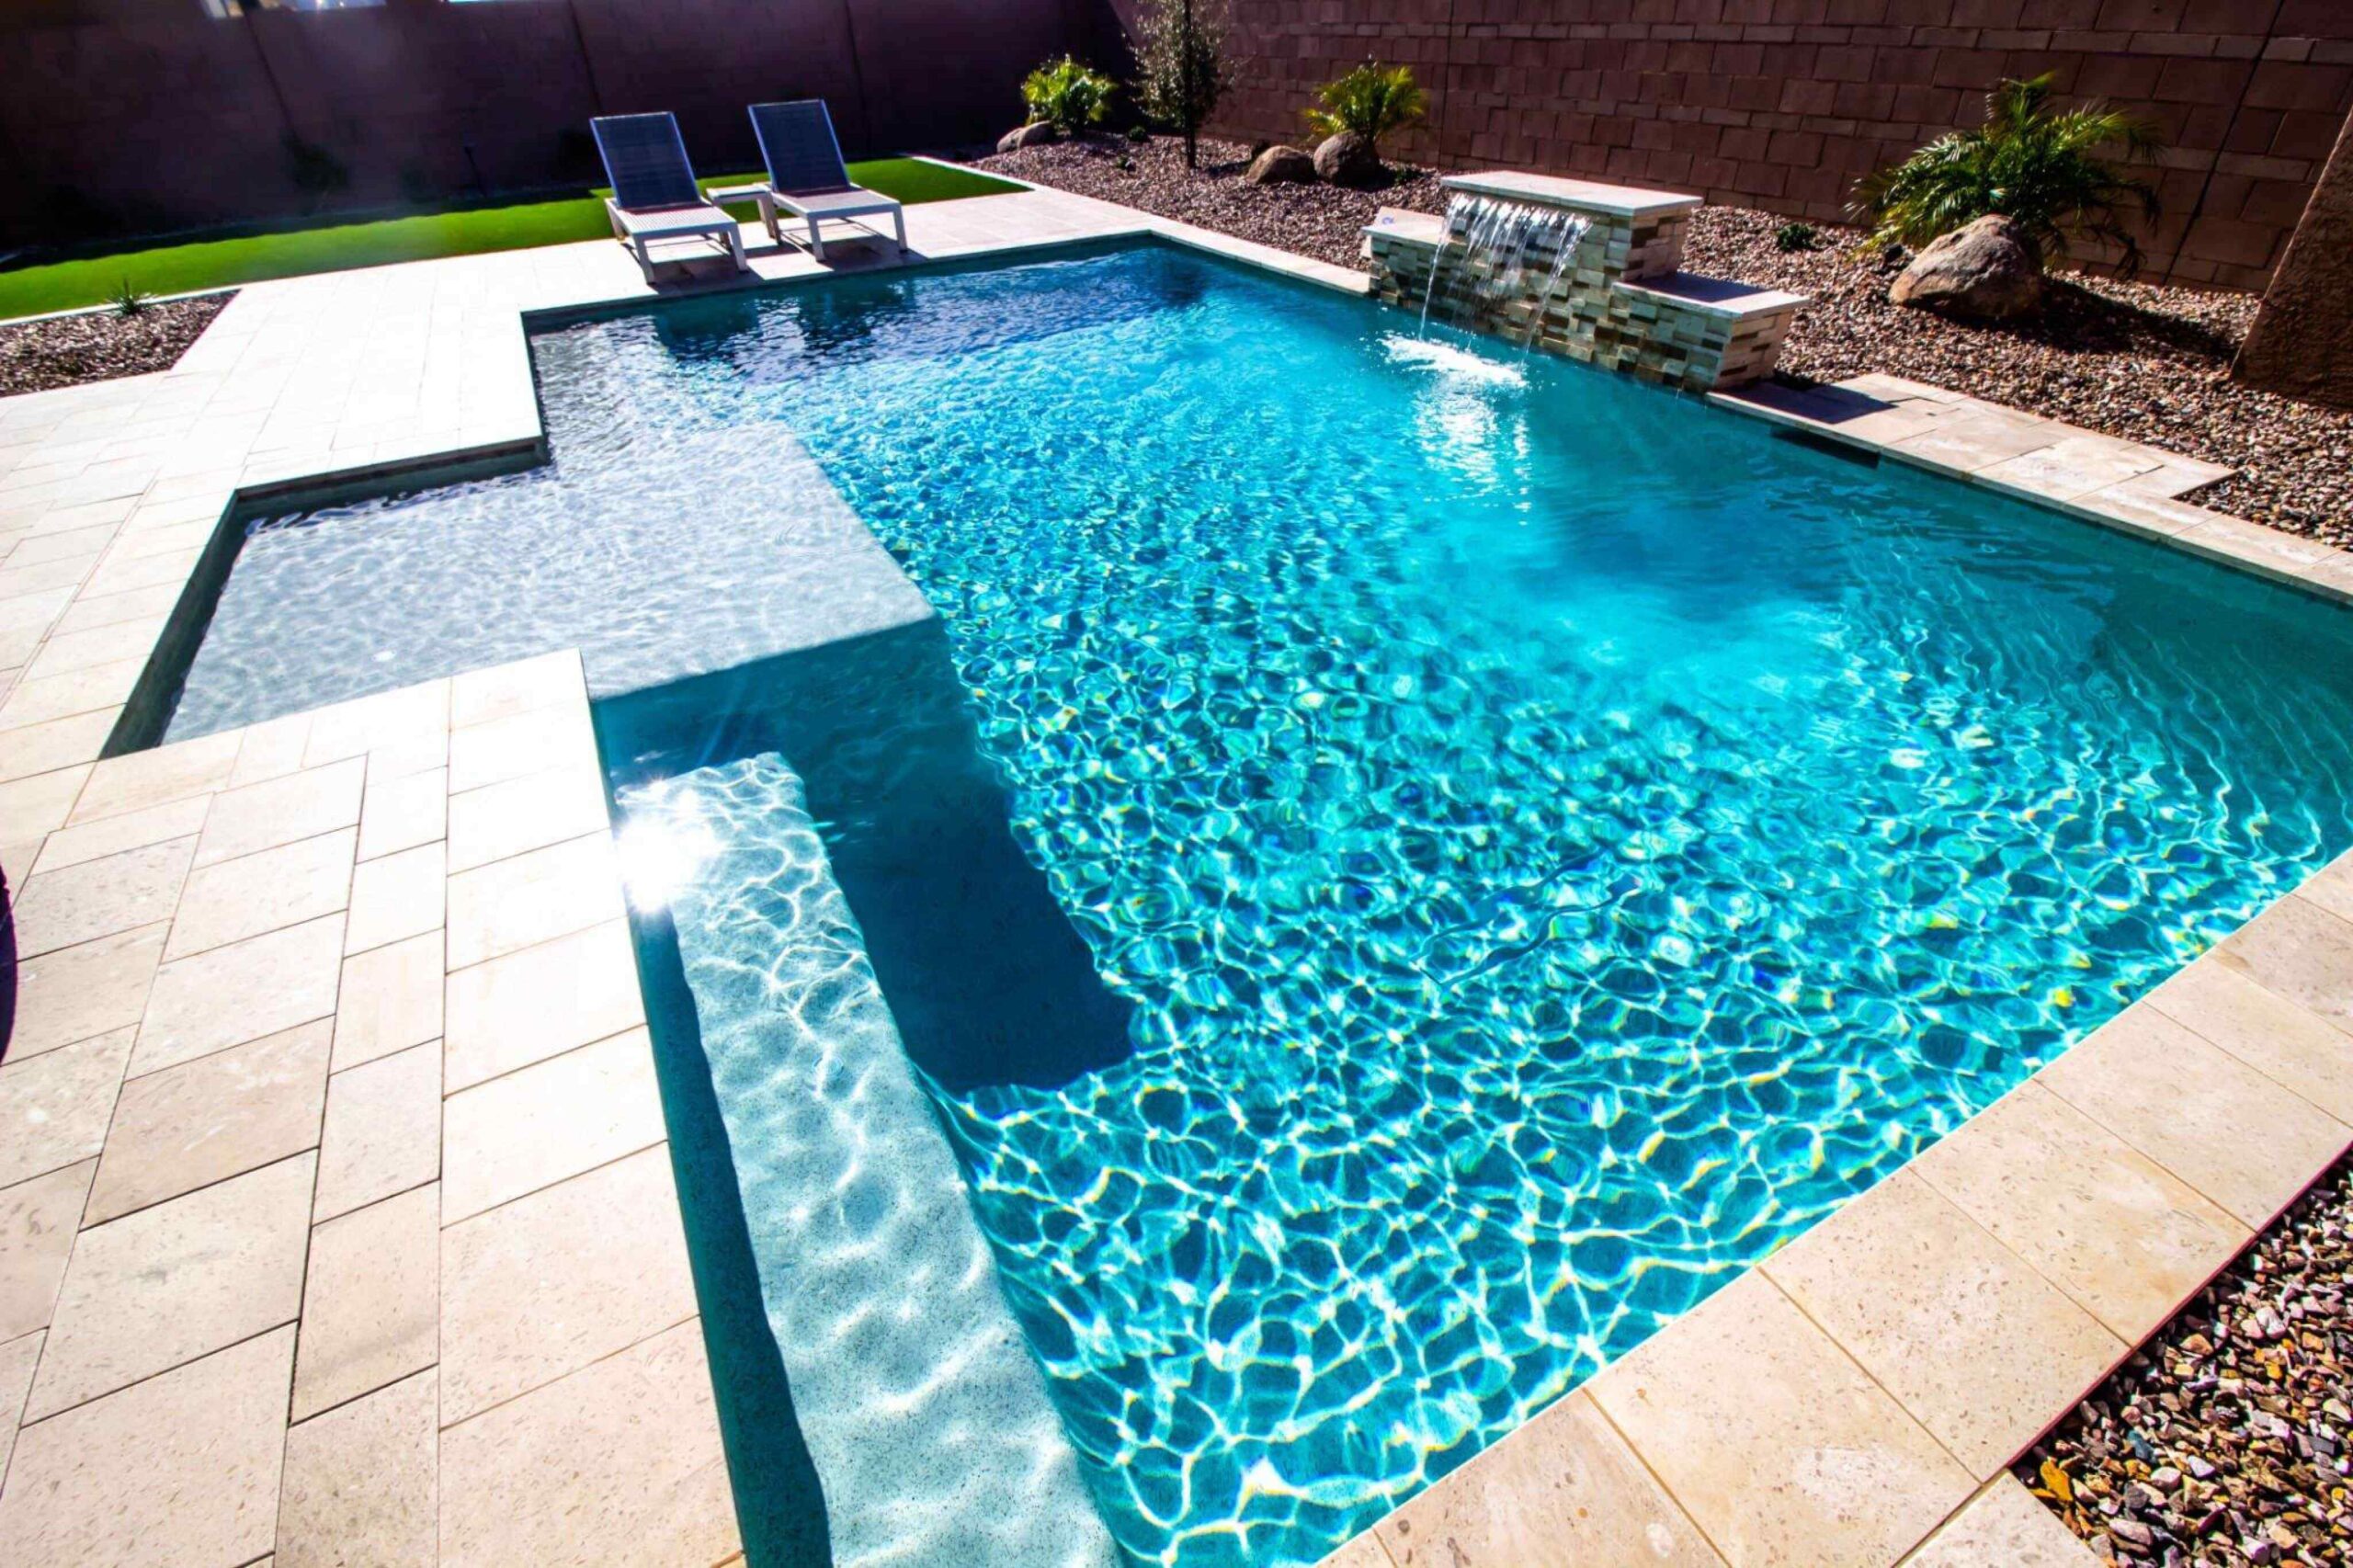 Consider For Pool Installations